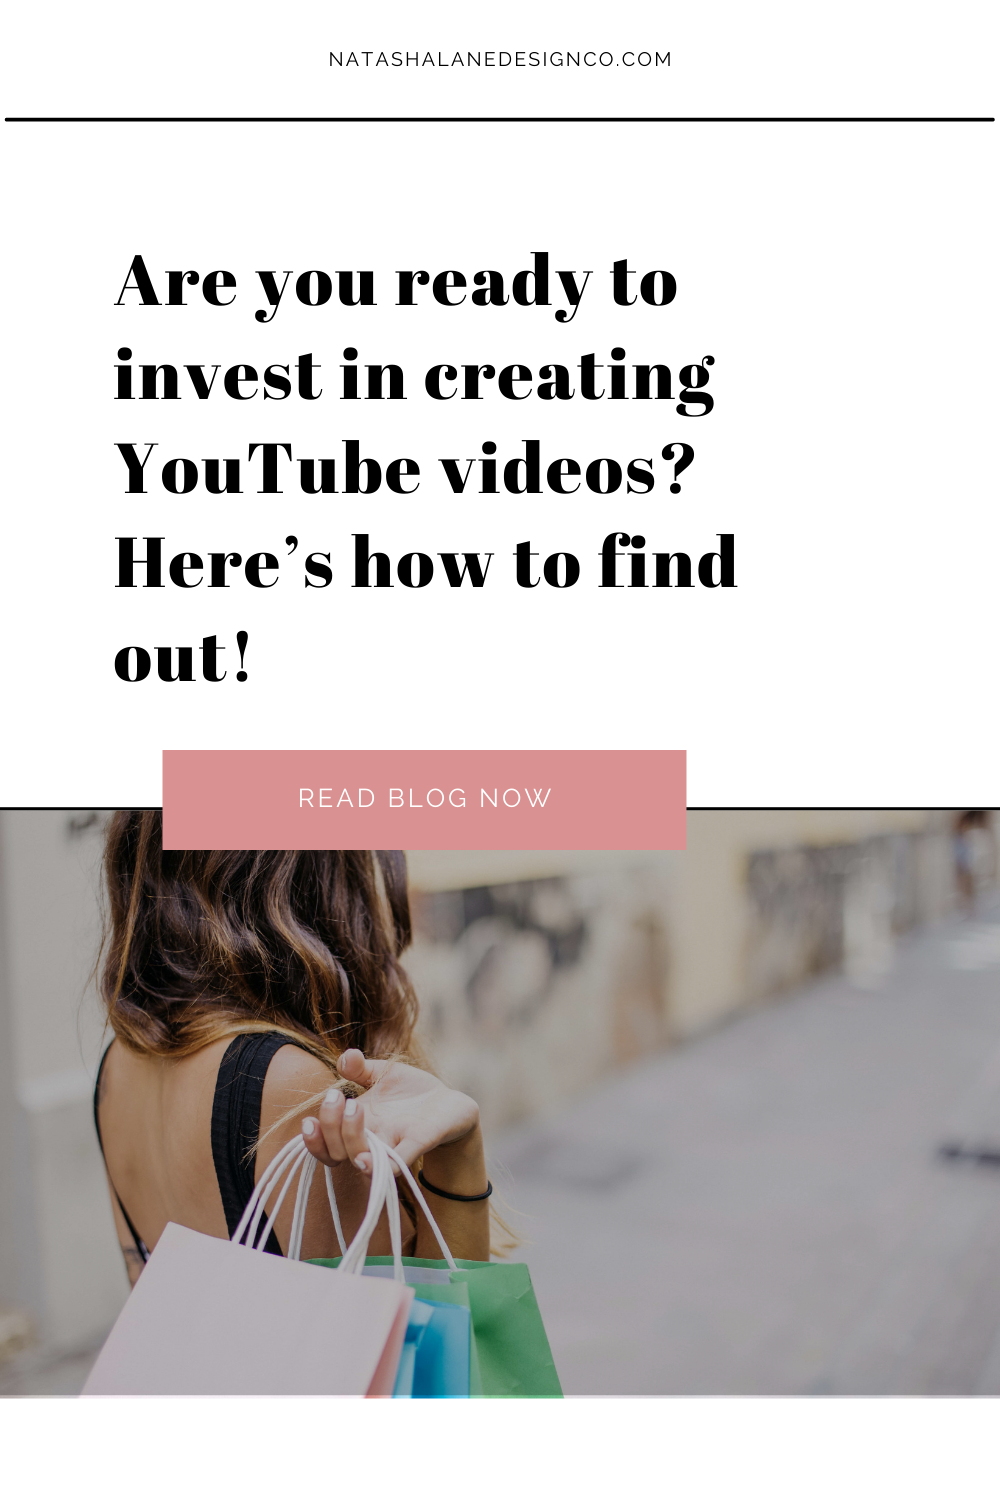 Are you ready to invest in creating YouTube videos_ Here’s how to find out! (5)